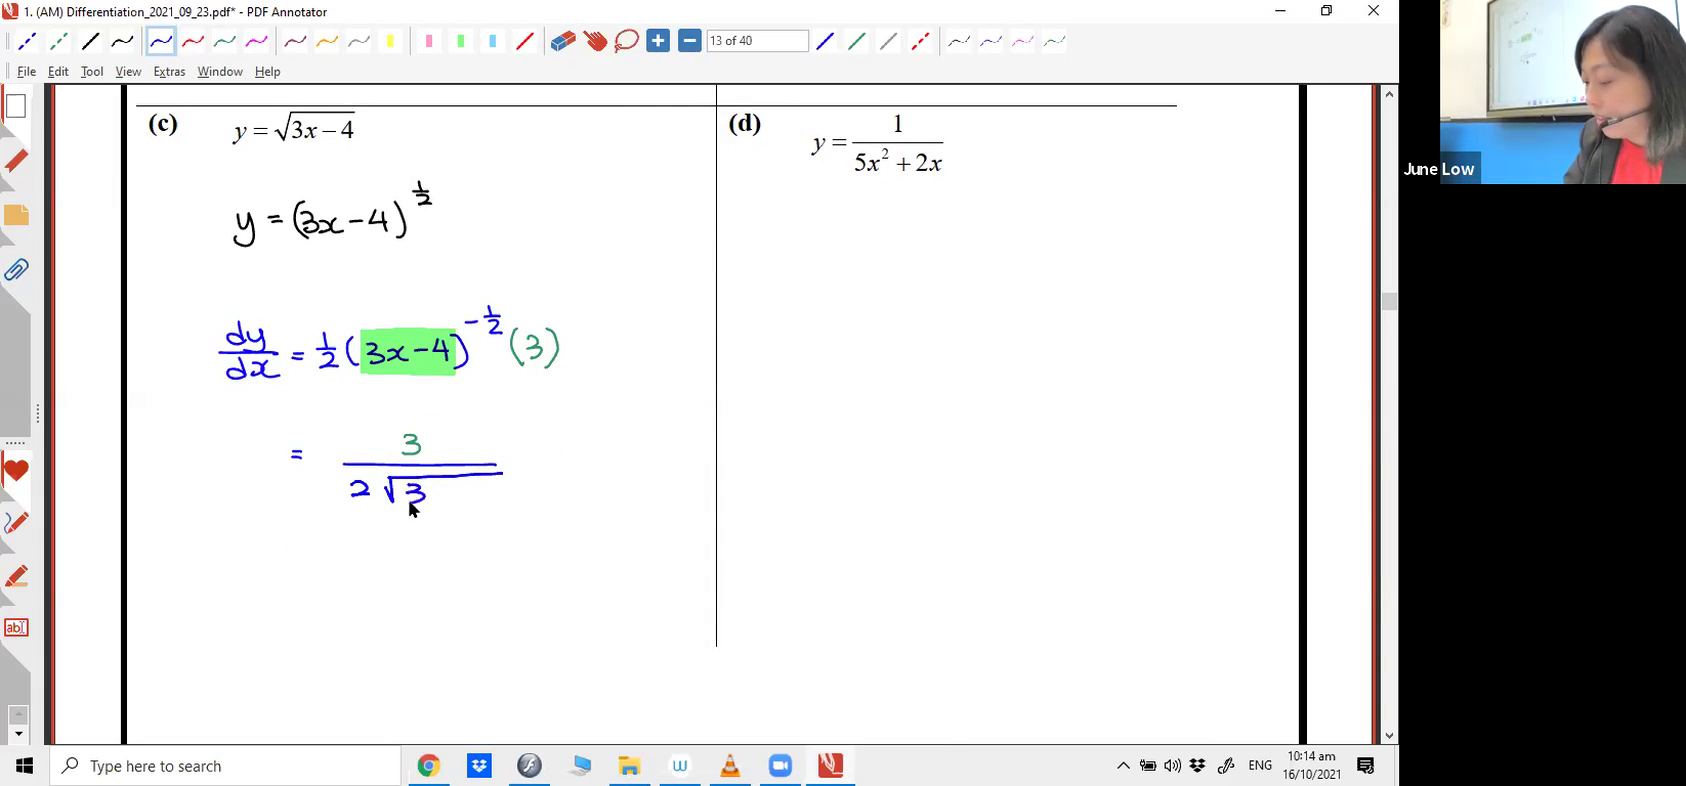 [DIFFERENTIATION] Chain Rule